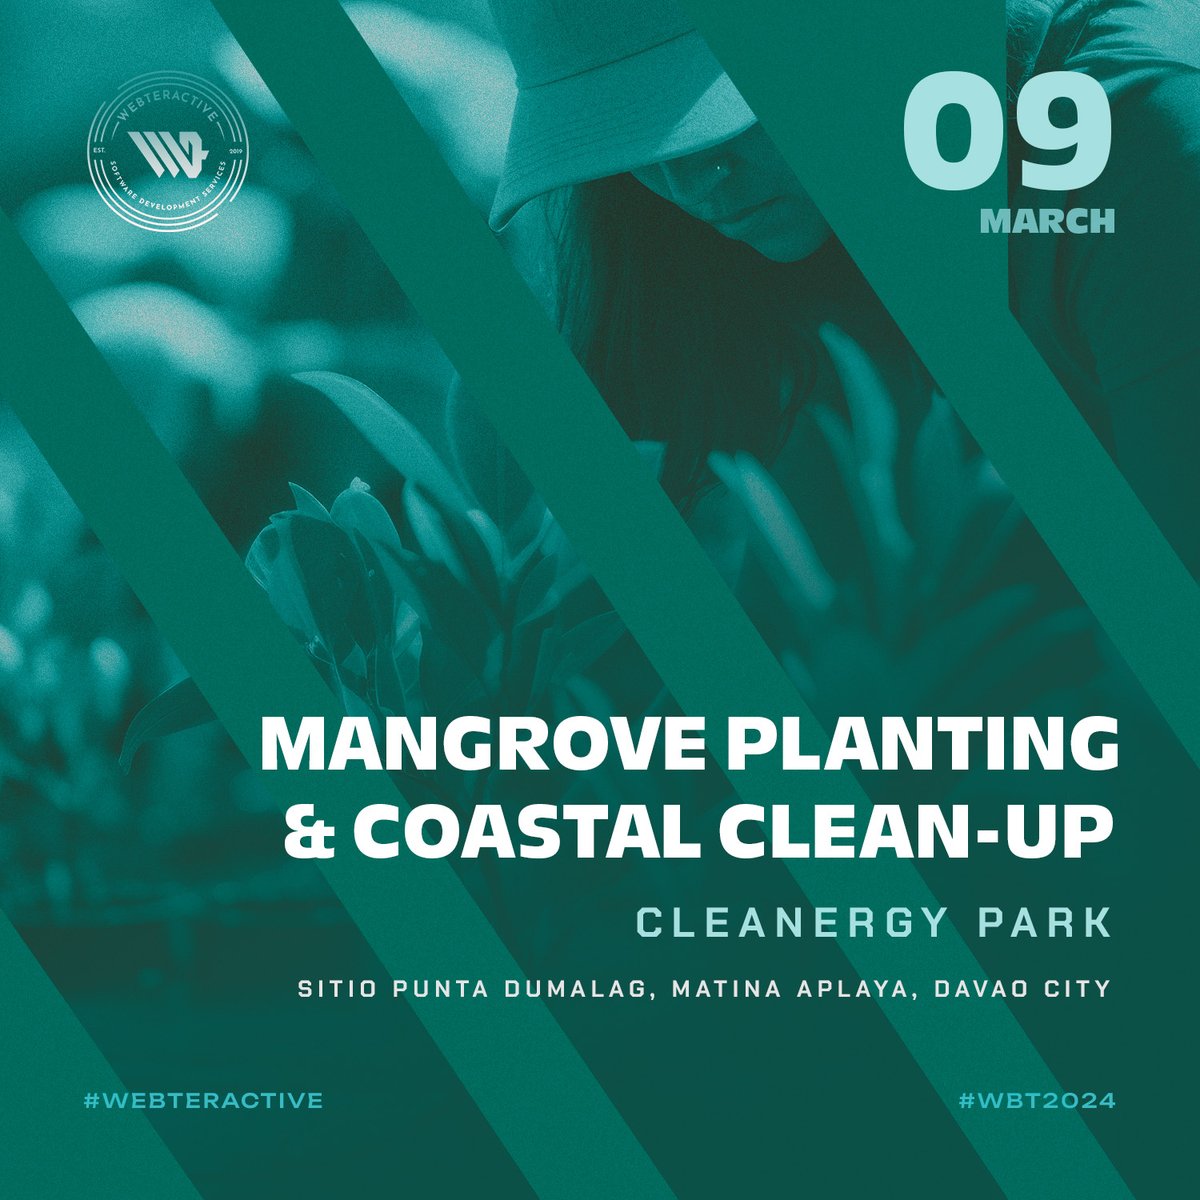 On March 9th, join the environmental action at Cleanergy Park! Plant  mangroves, clean the coast, protect marine ecosystems. Let's make a  positive impact together! #Webteractive #MangrovePlanting #CoastalCleanup #CleanergyPark #EnvironmentalAction #ProtectOurEcosystems 🌊🌱